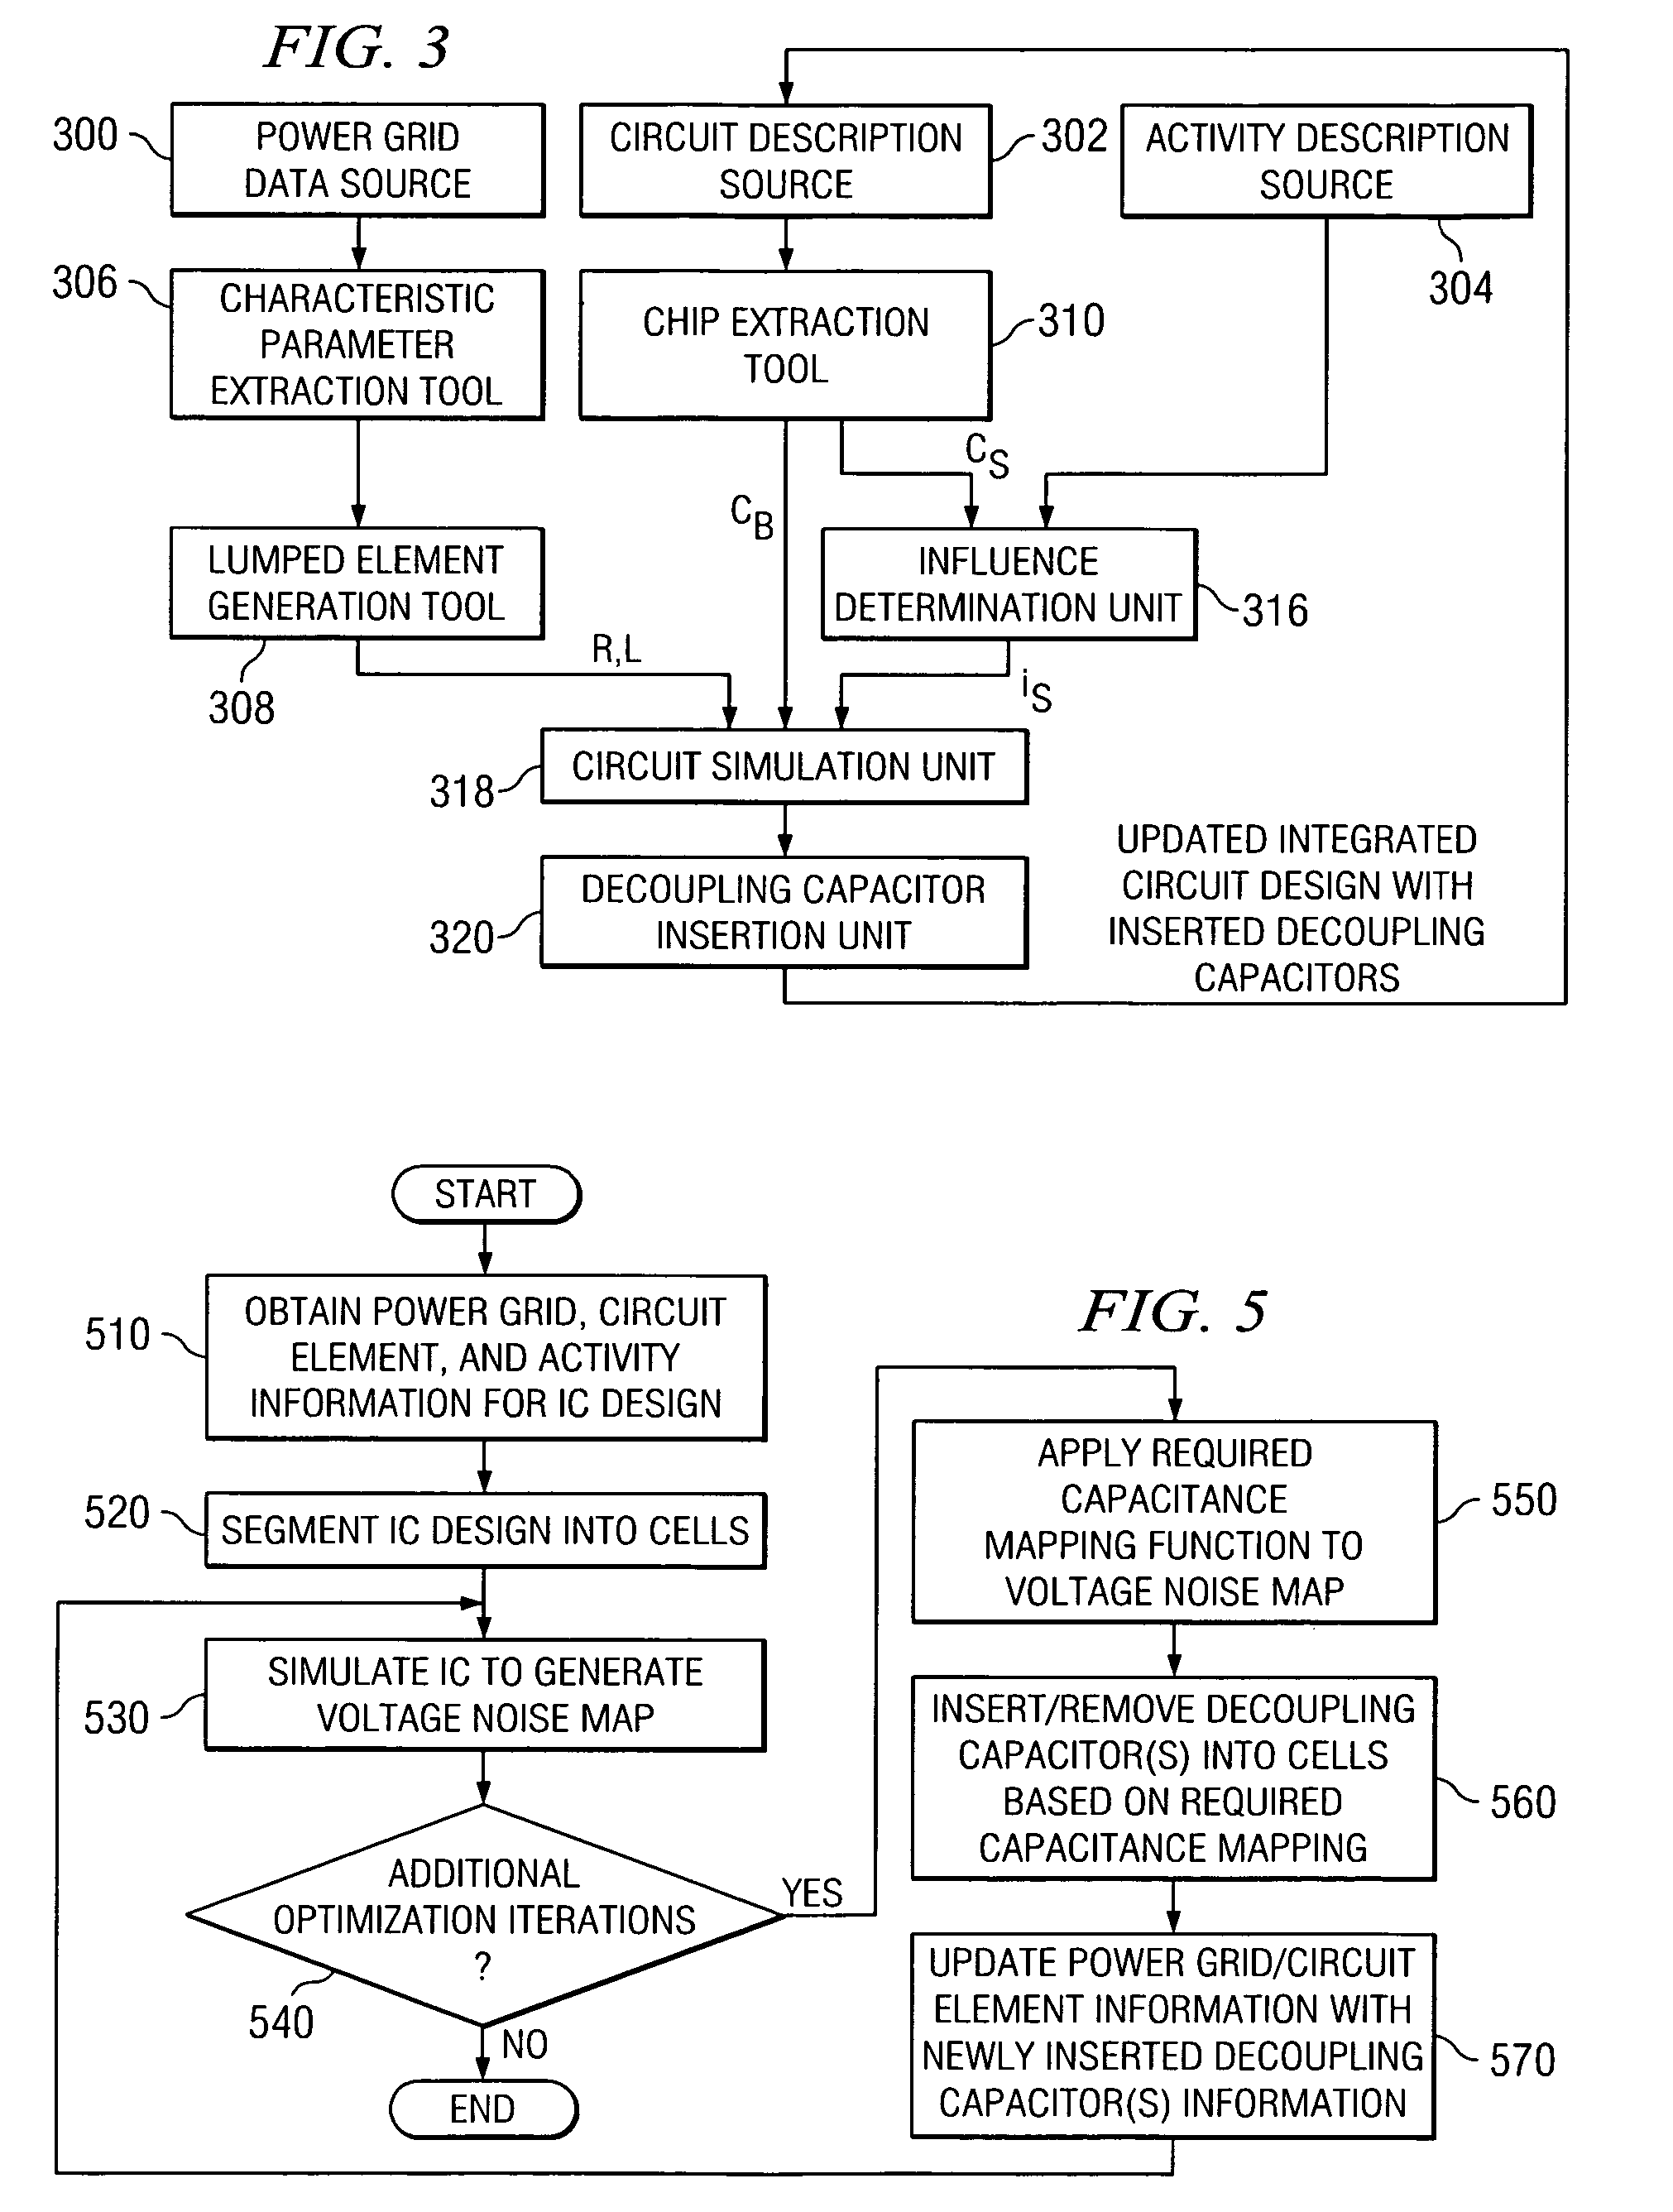 System and method for automatic insertion of on-chip decoupling capacitors